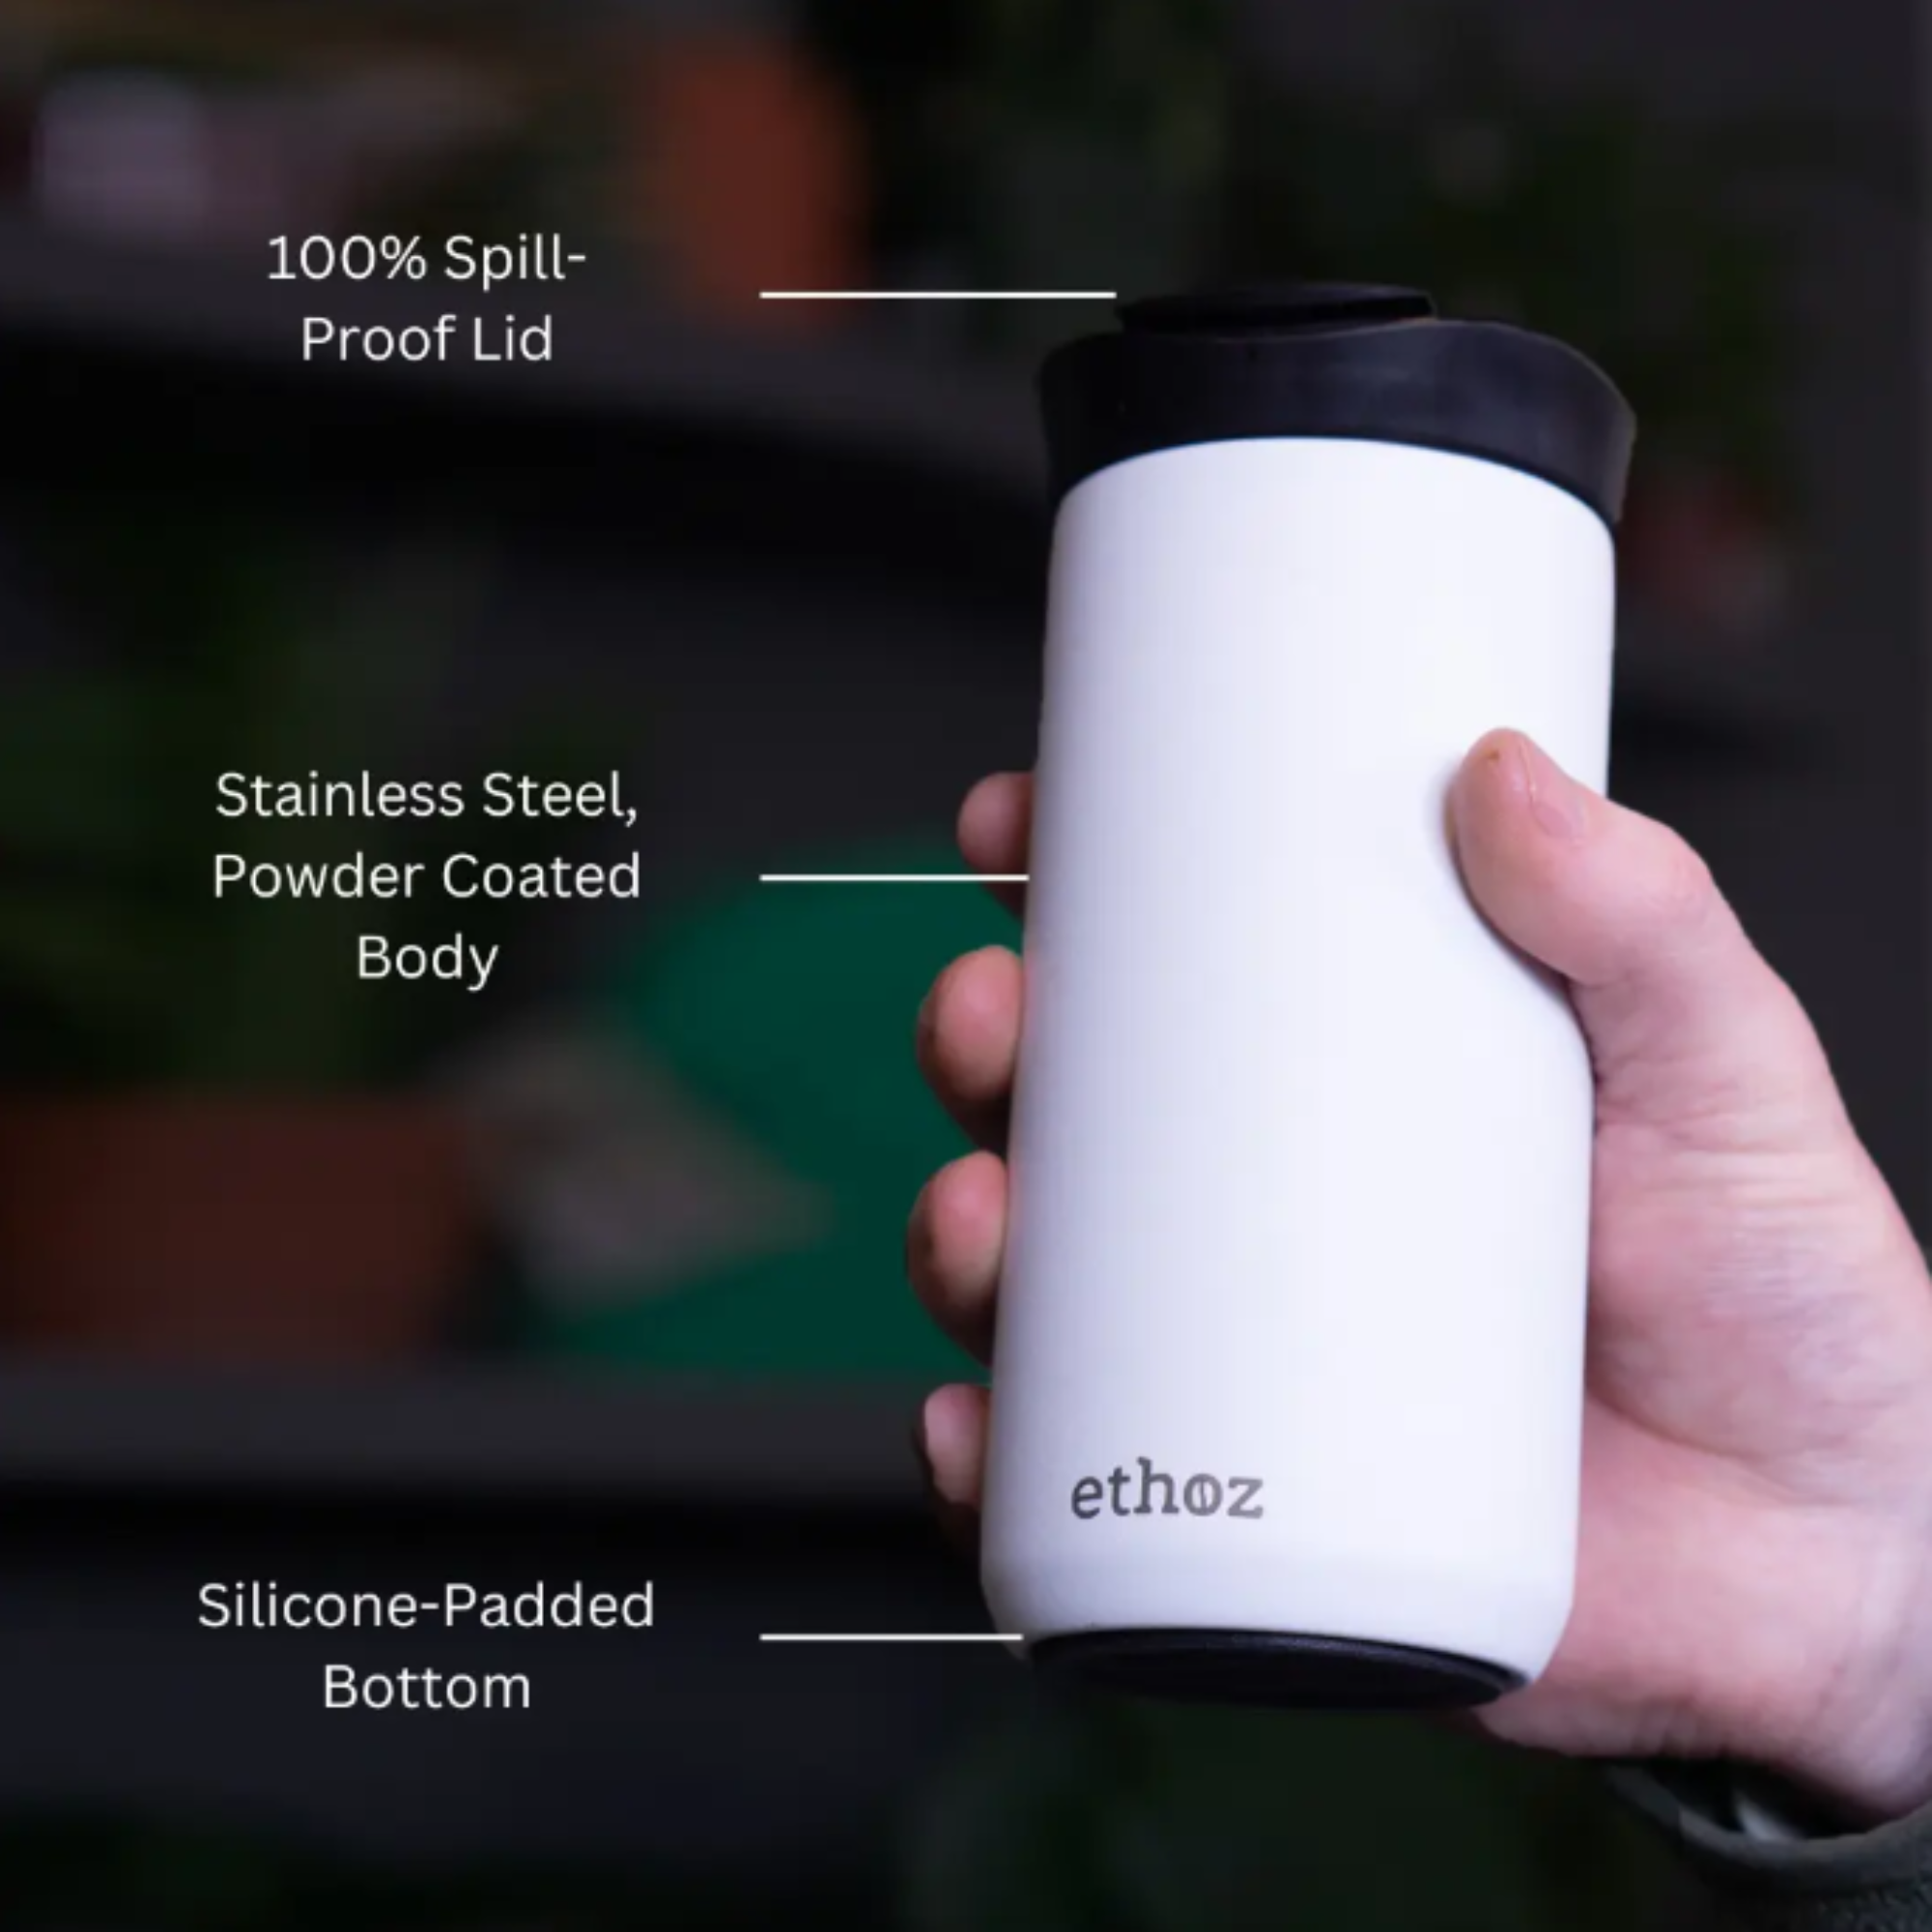 white travel mug showing 100% spill-proof lid, stainless steel, powder-coated body, and silicone-padded bottom